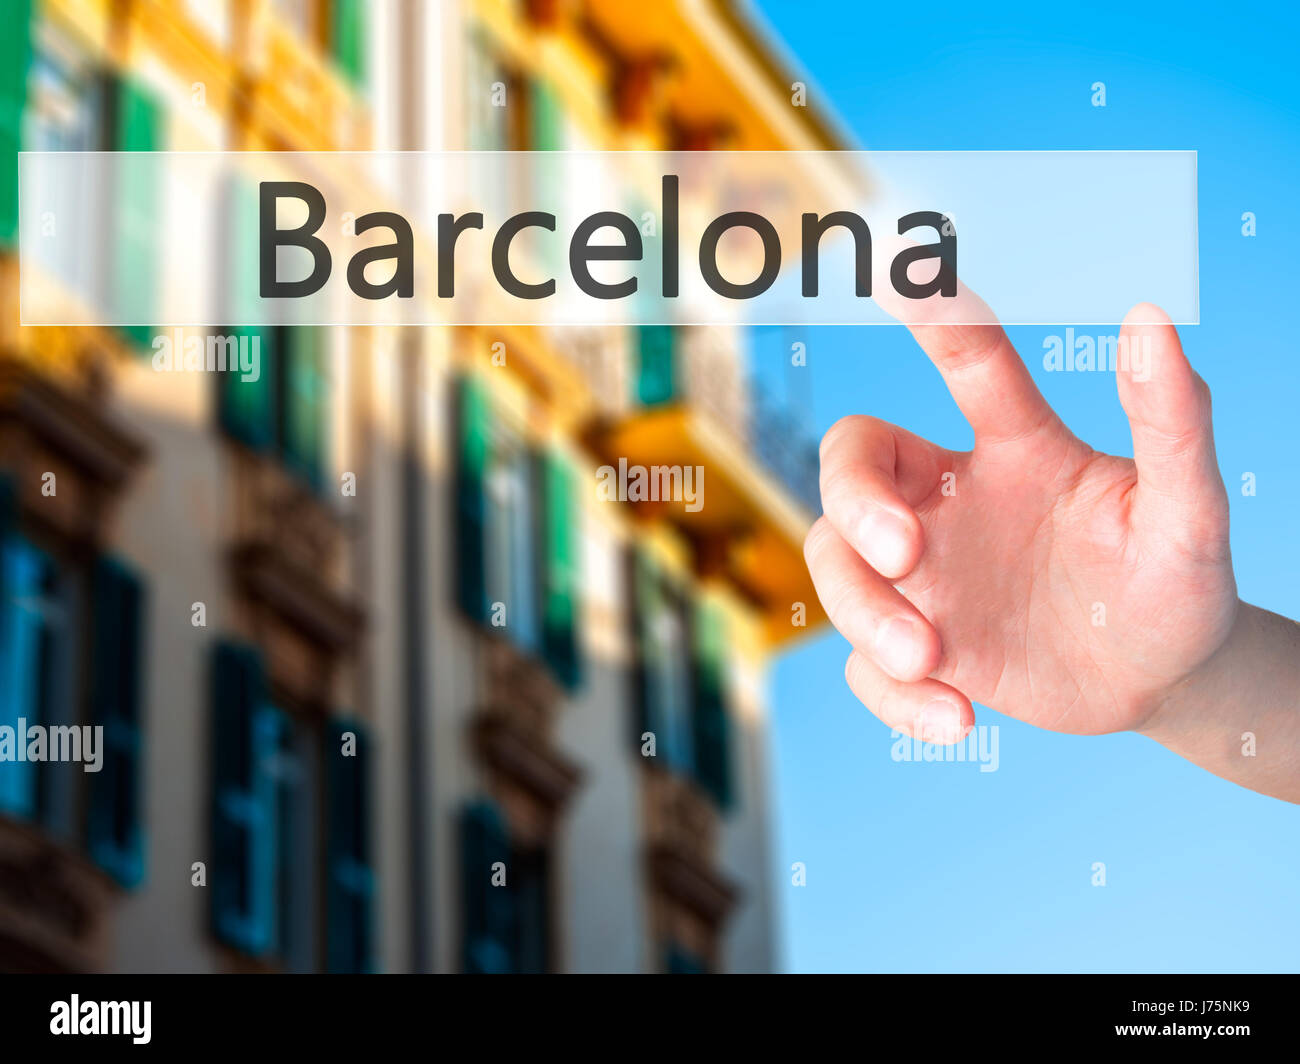 Barcelona - Hand pressing a button on blurred background concept . Business, technology, internet concept. Stock Photo Stock Photo